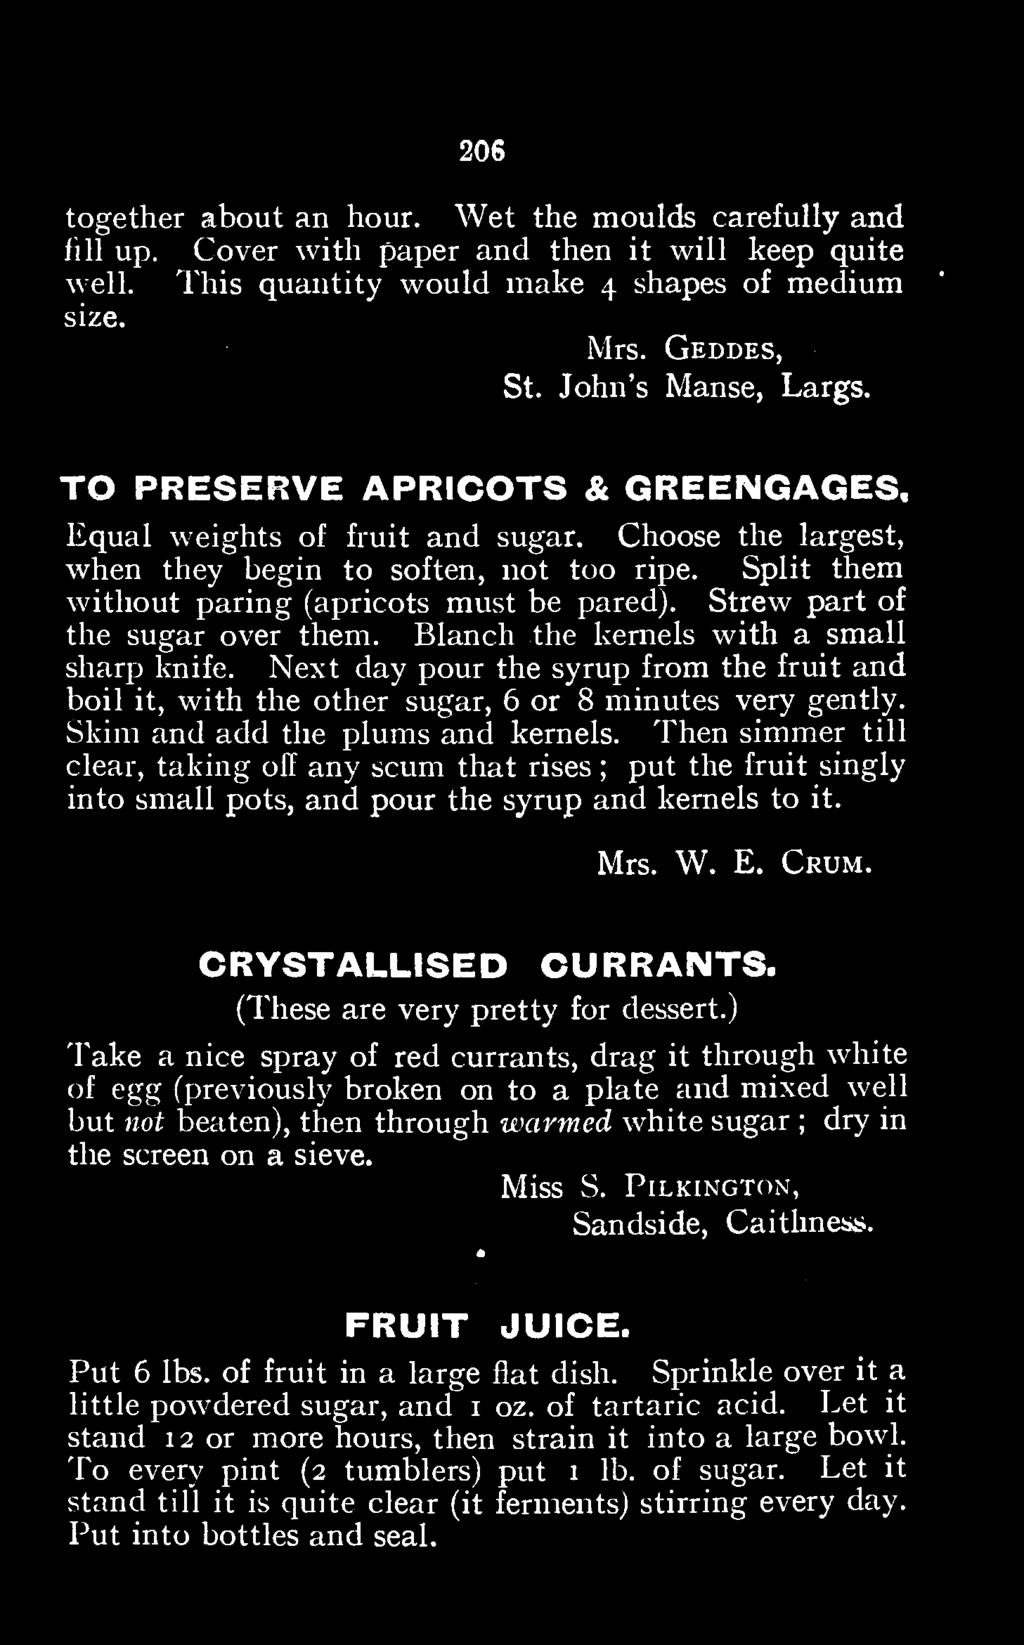 Then simmer till clear, taking off any scum that rises ; put the fruit singly into small pots, and pour the syrup and kernels to it. Mrs. W. E. Crum. CRYSTALLISED CURRANTS.